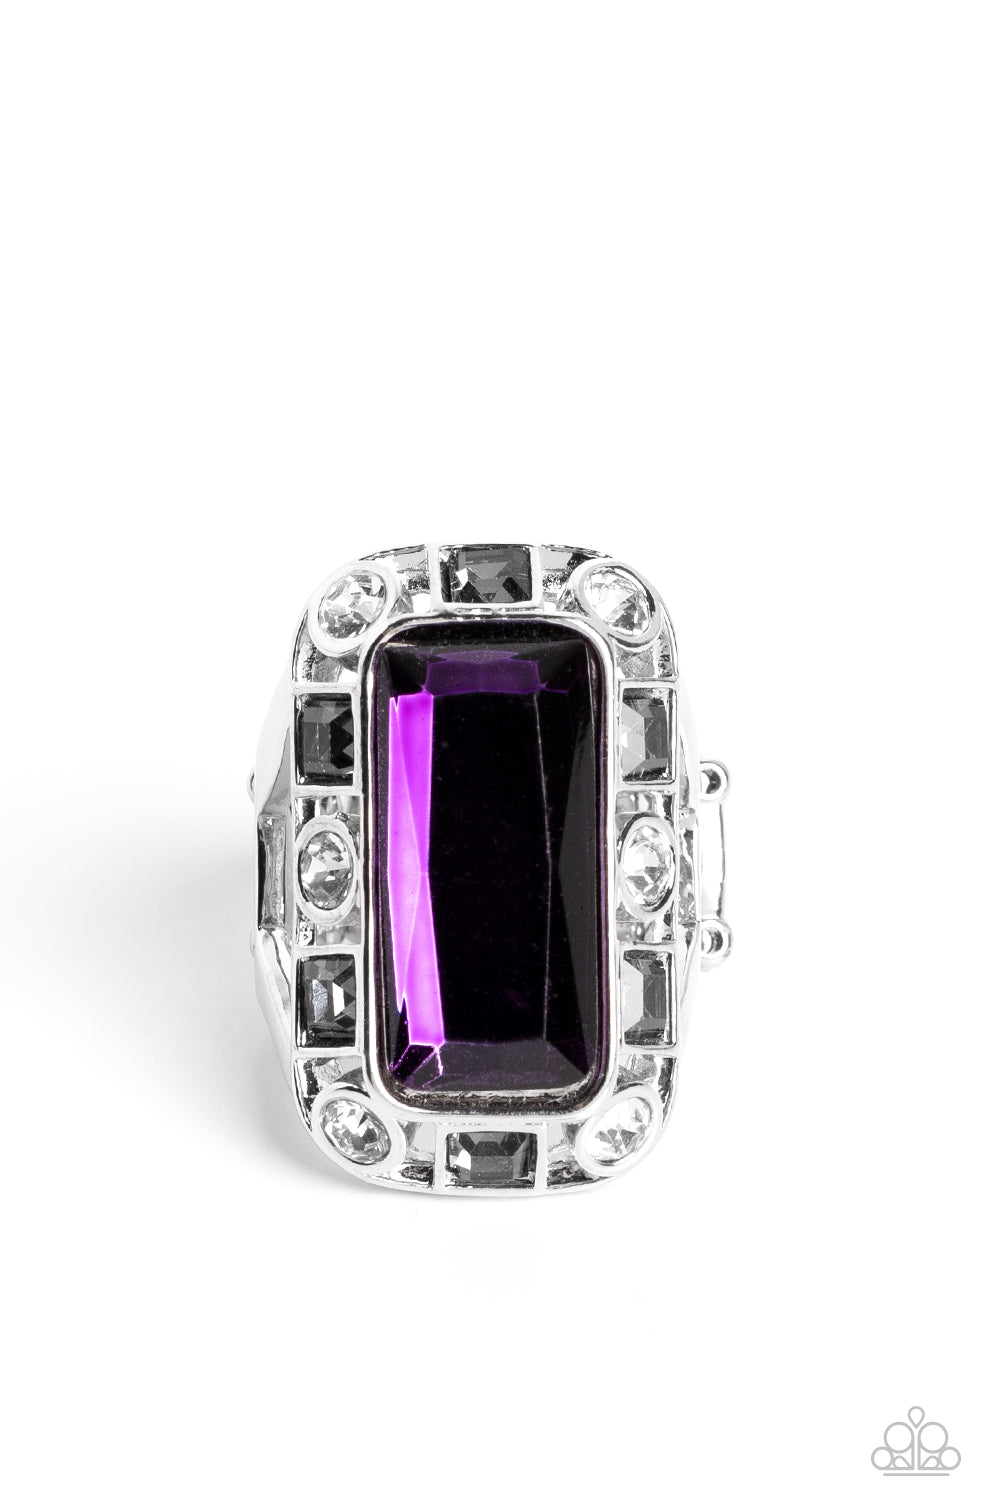 Radiant Rhinestones - Purple and Silver Ring - Paparazzi Accessories - Pressed into a curved, rectangular silver frame, an oversized emerald-cut purple gem shines atop the finger. Dainty square and round gems in shades of white and smoky black airily encircle the oversized gem for some additional shimmer resulting in a radiant centerpiece ring.